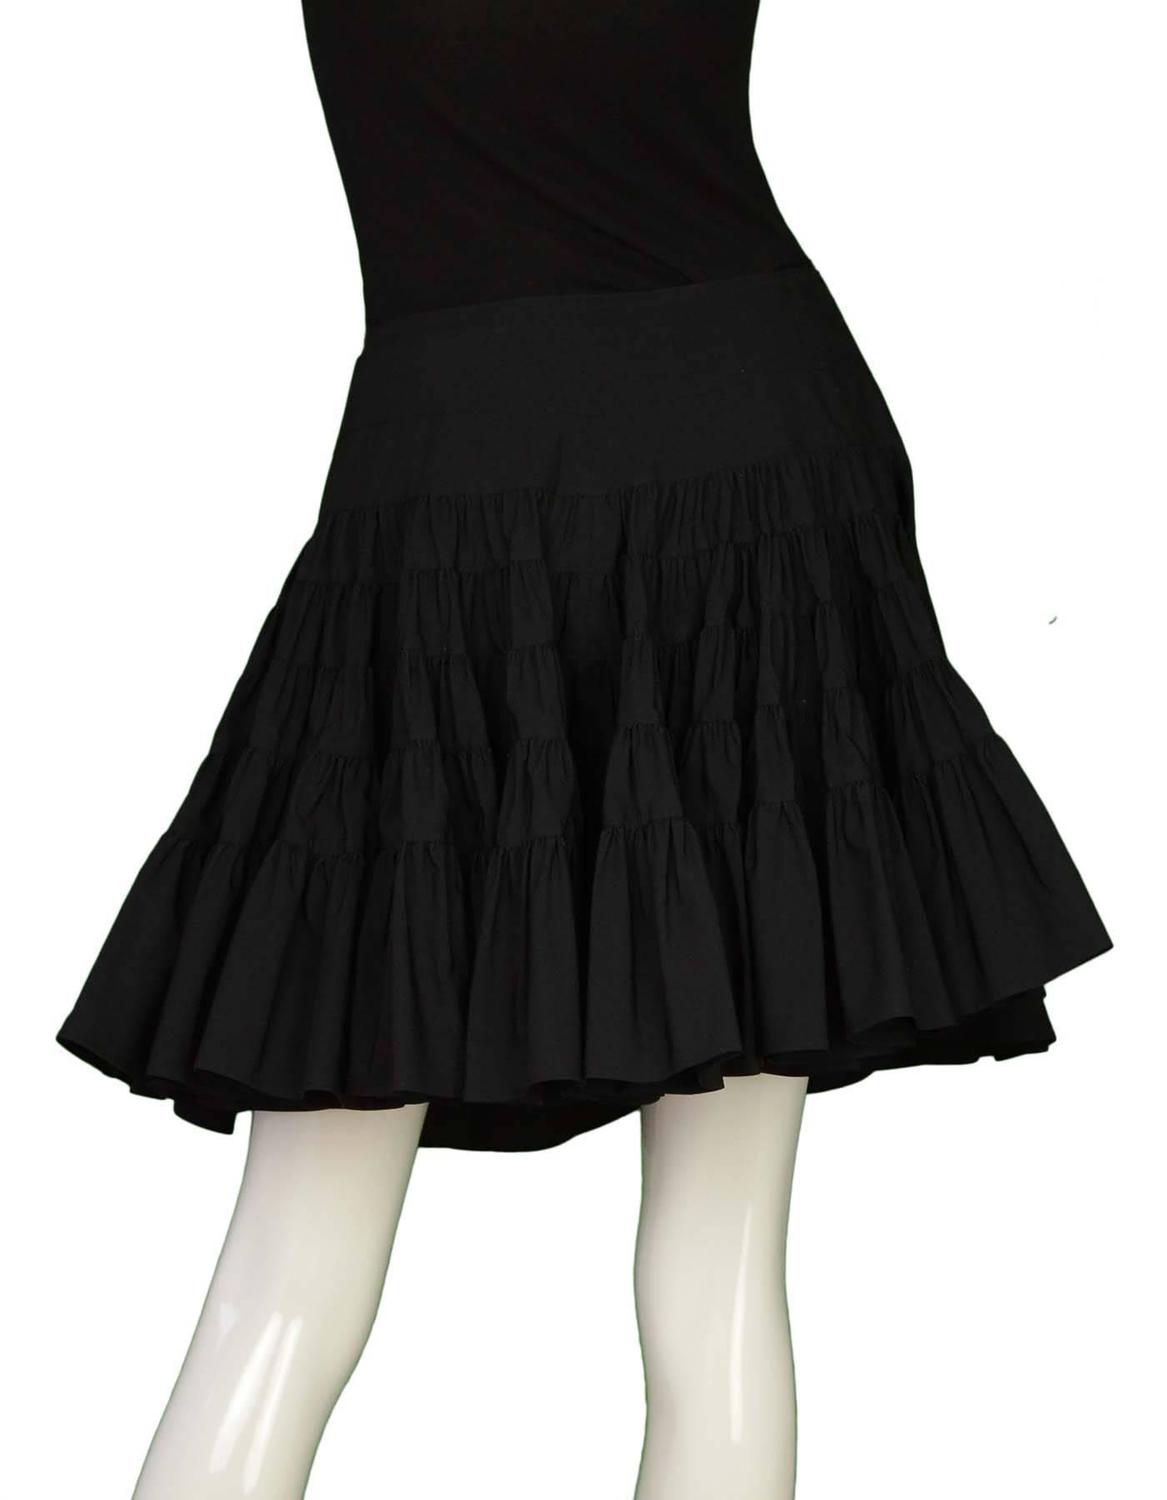 Alaia Black Tiered Ruffle Wrap Skirt sz 42 For Sale at 1stdibs